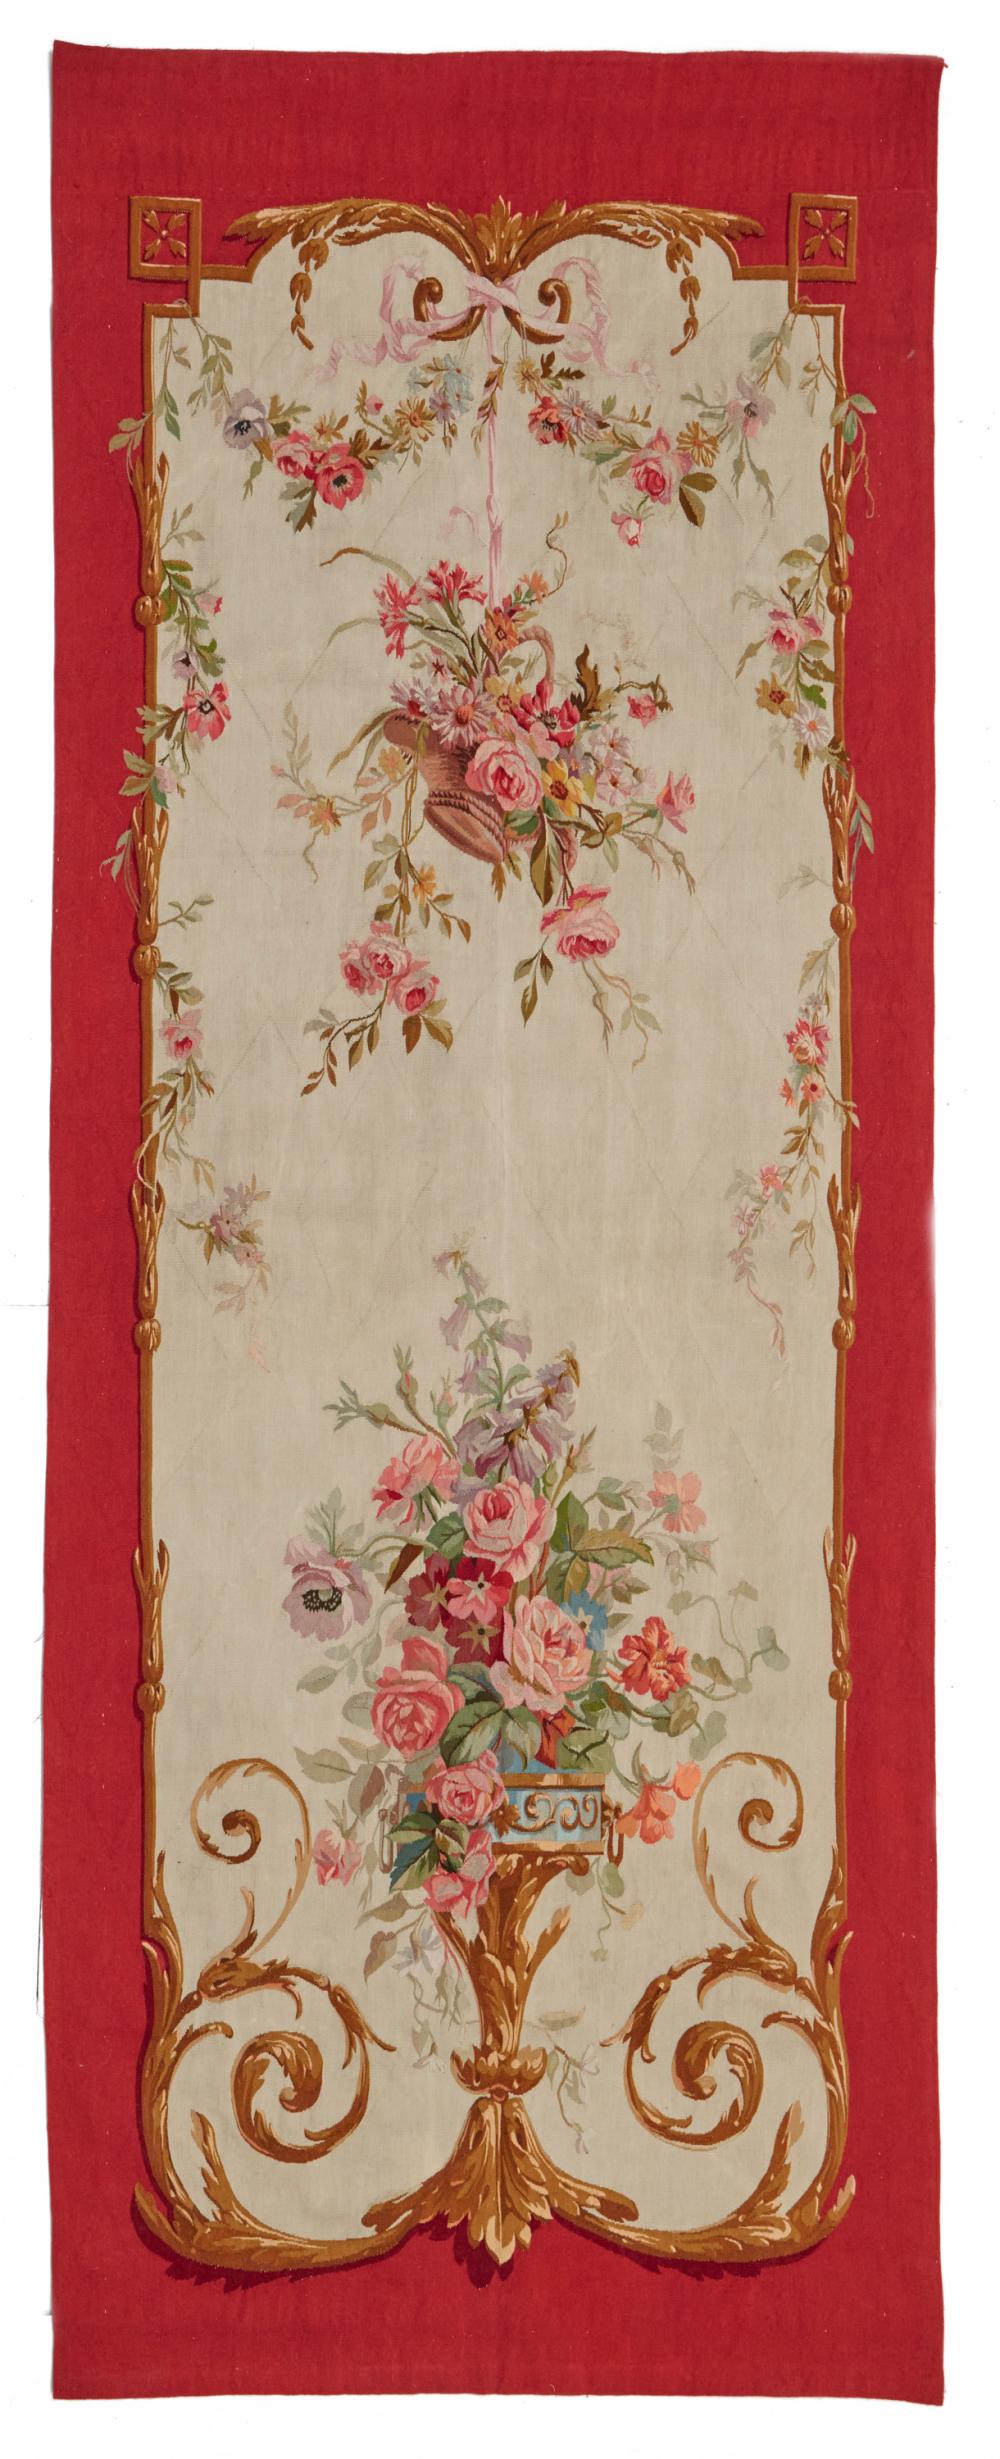 AN AUBUSSON WALL TAPESTRYAn Aubusson